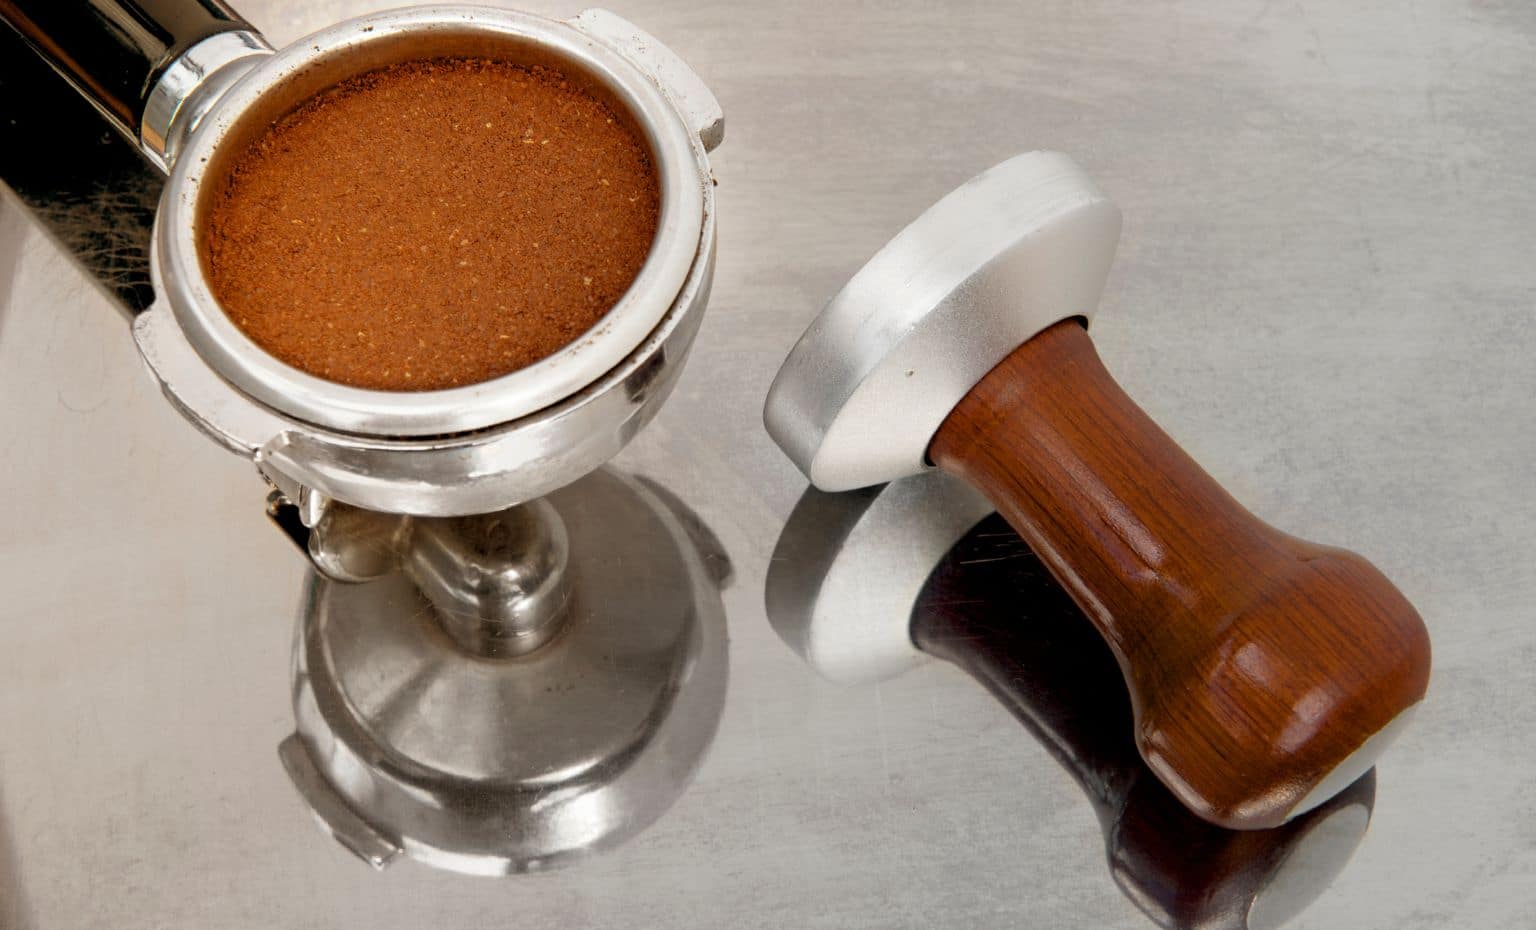 What to look for in a coffee tamper